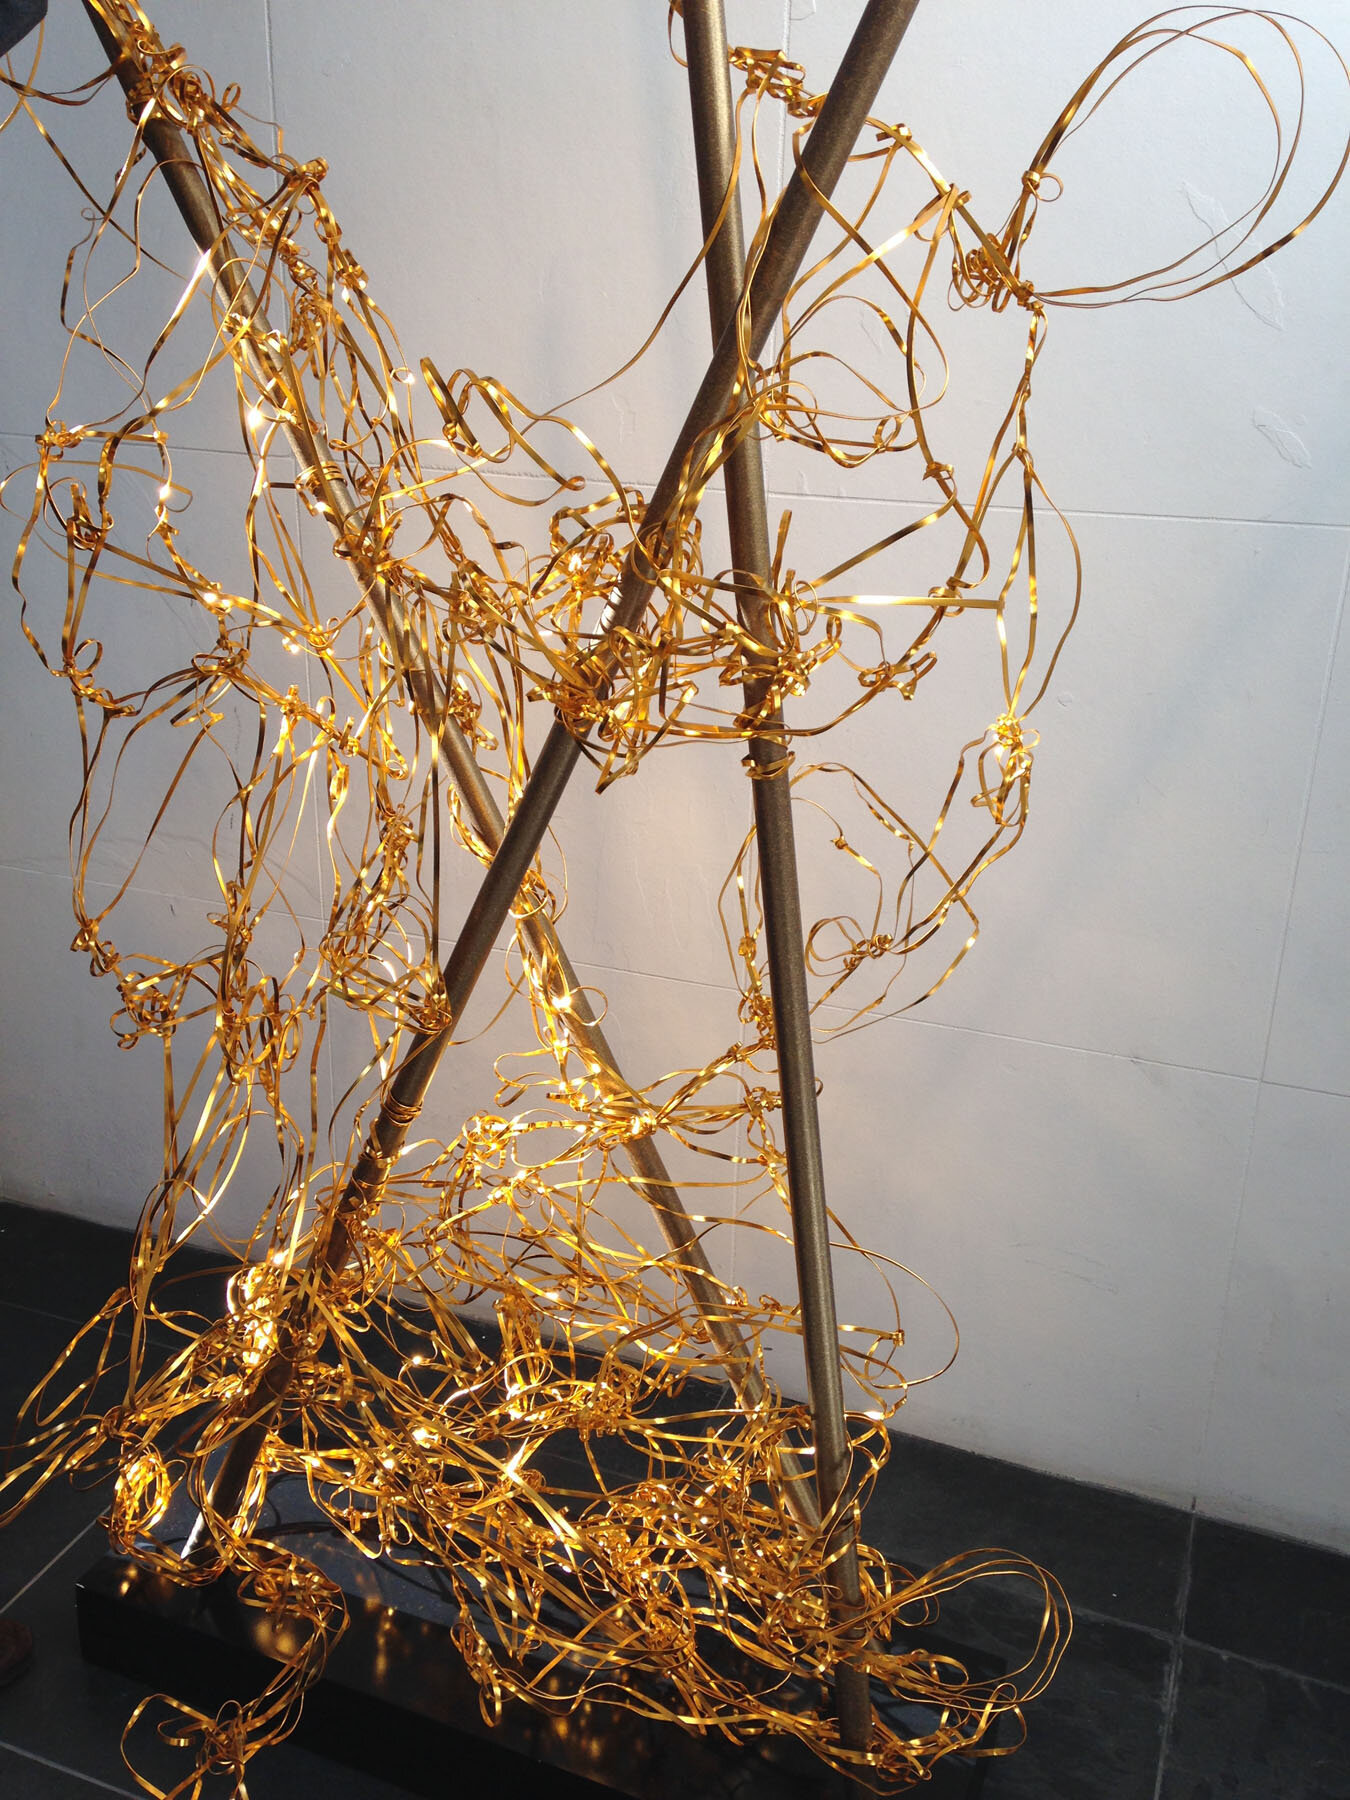 anne patterson_all that glitters is gold_wire sculpture_2.jpg